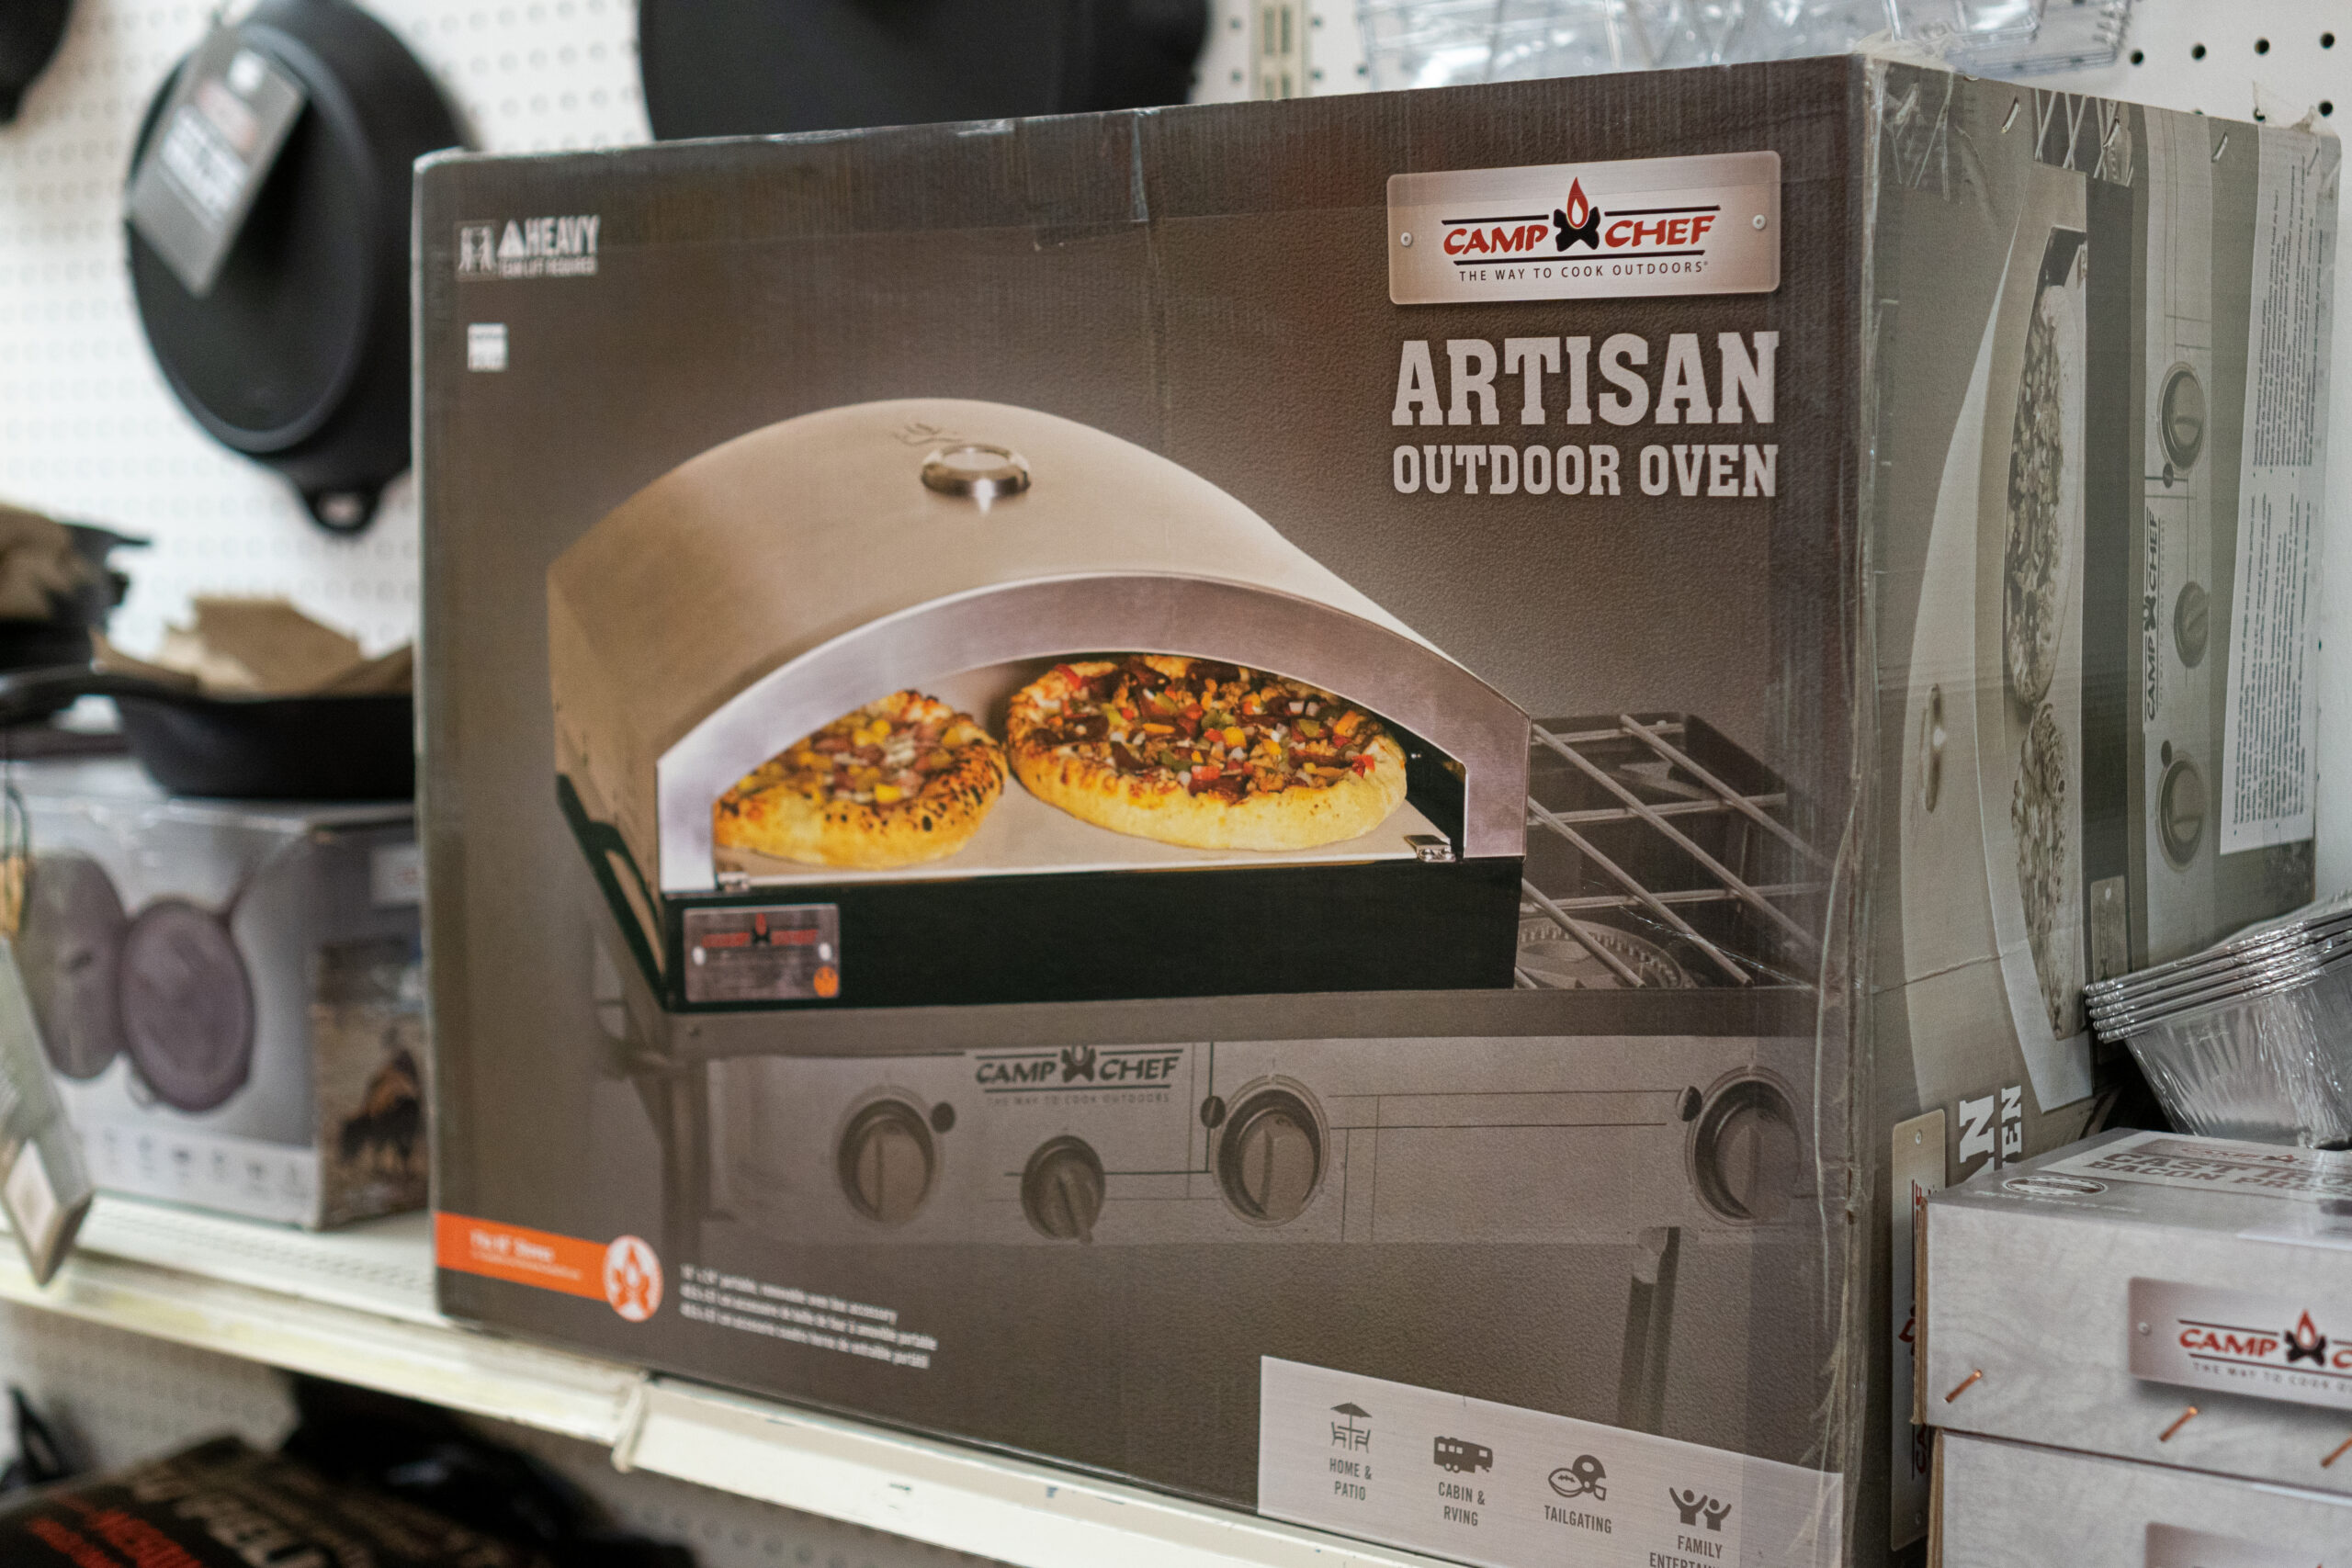 An outdoor oven grill attachment from the Camp Chef brand.